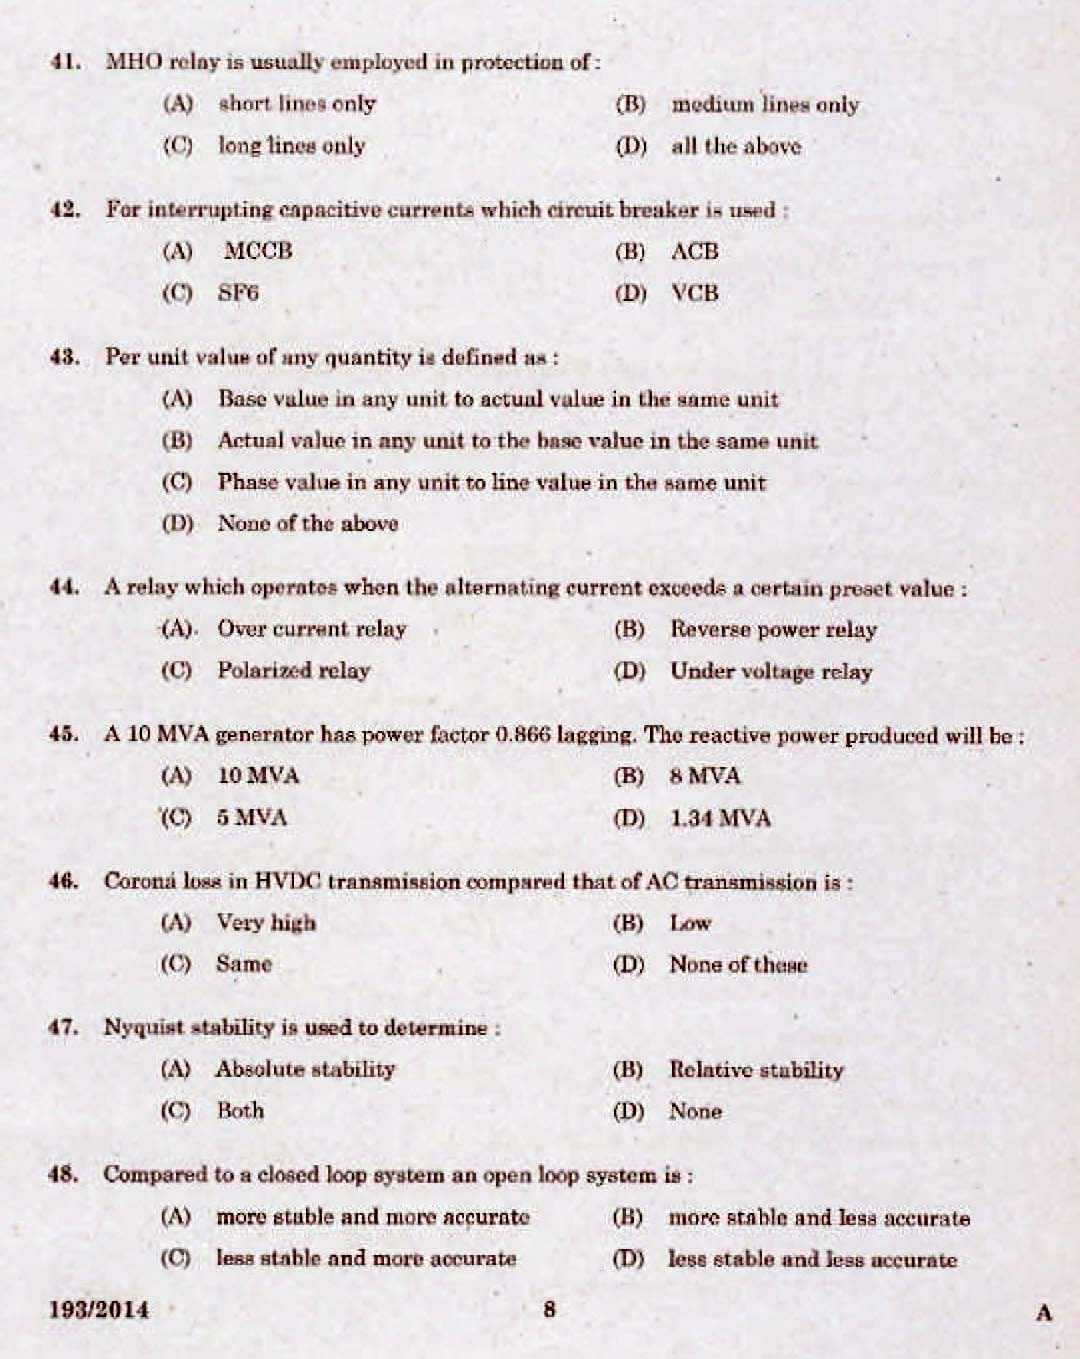 Kerala PSC Assistant Engineer Electrical Exam 2014 Question Paper Code 1932014 6